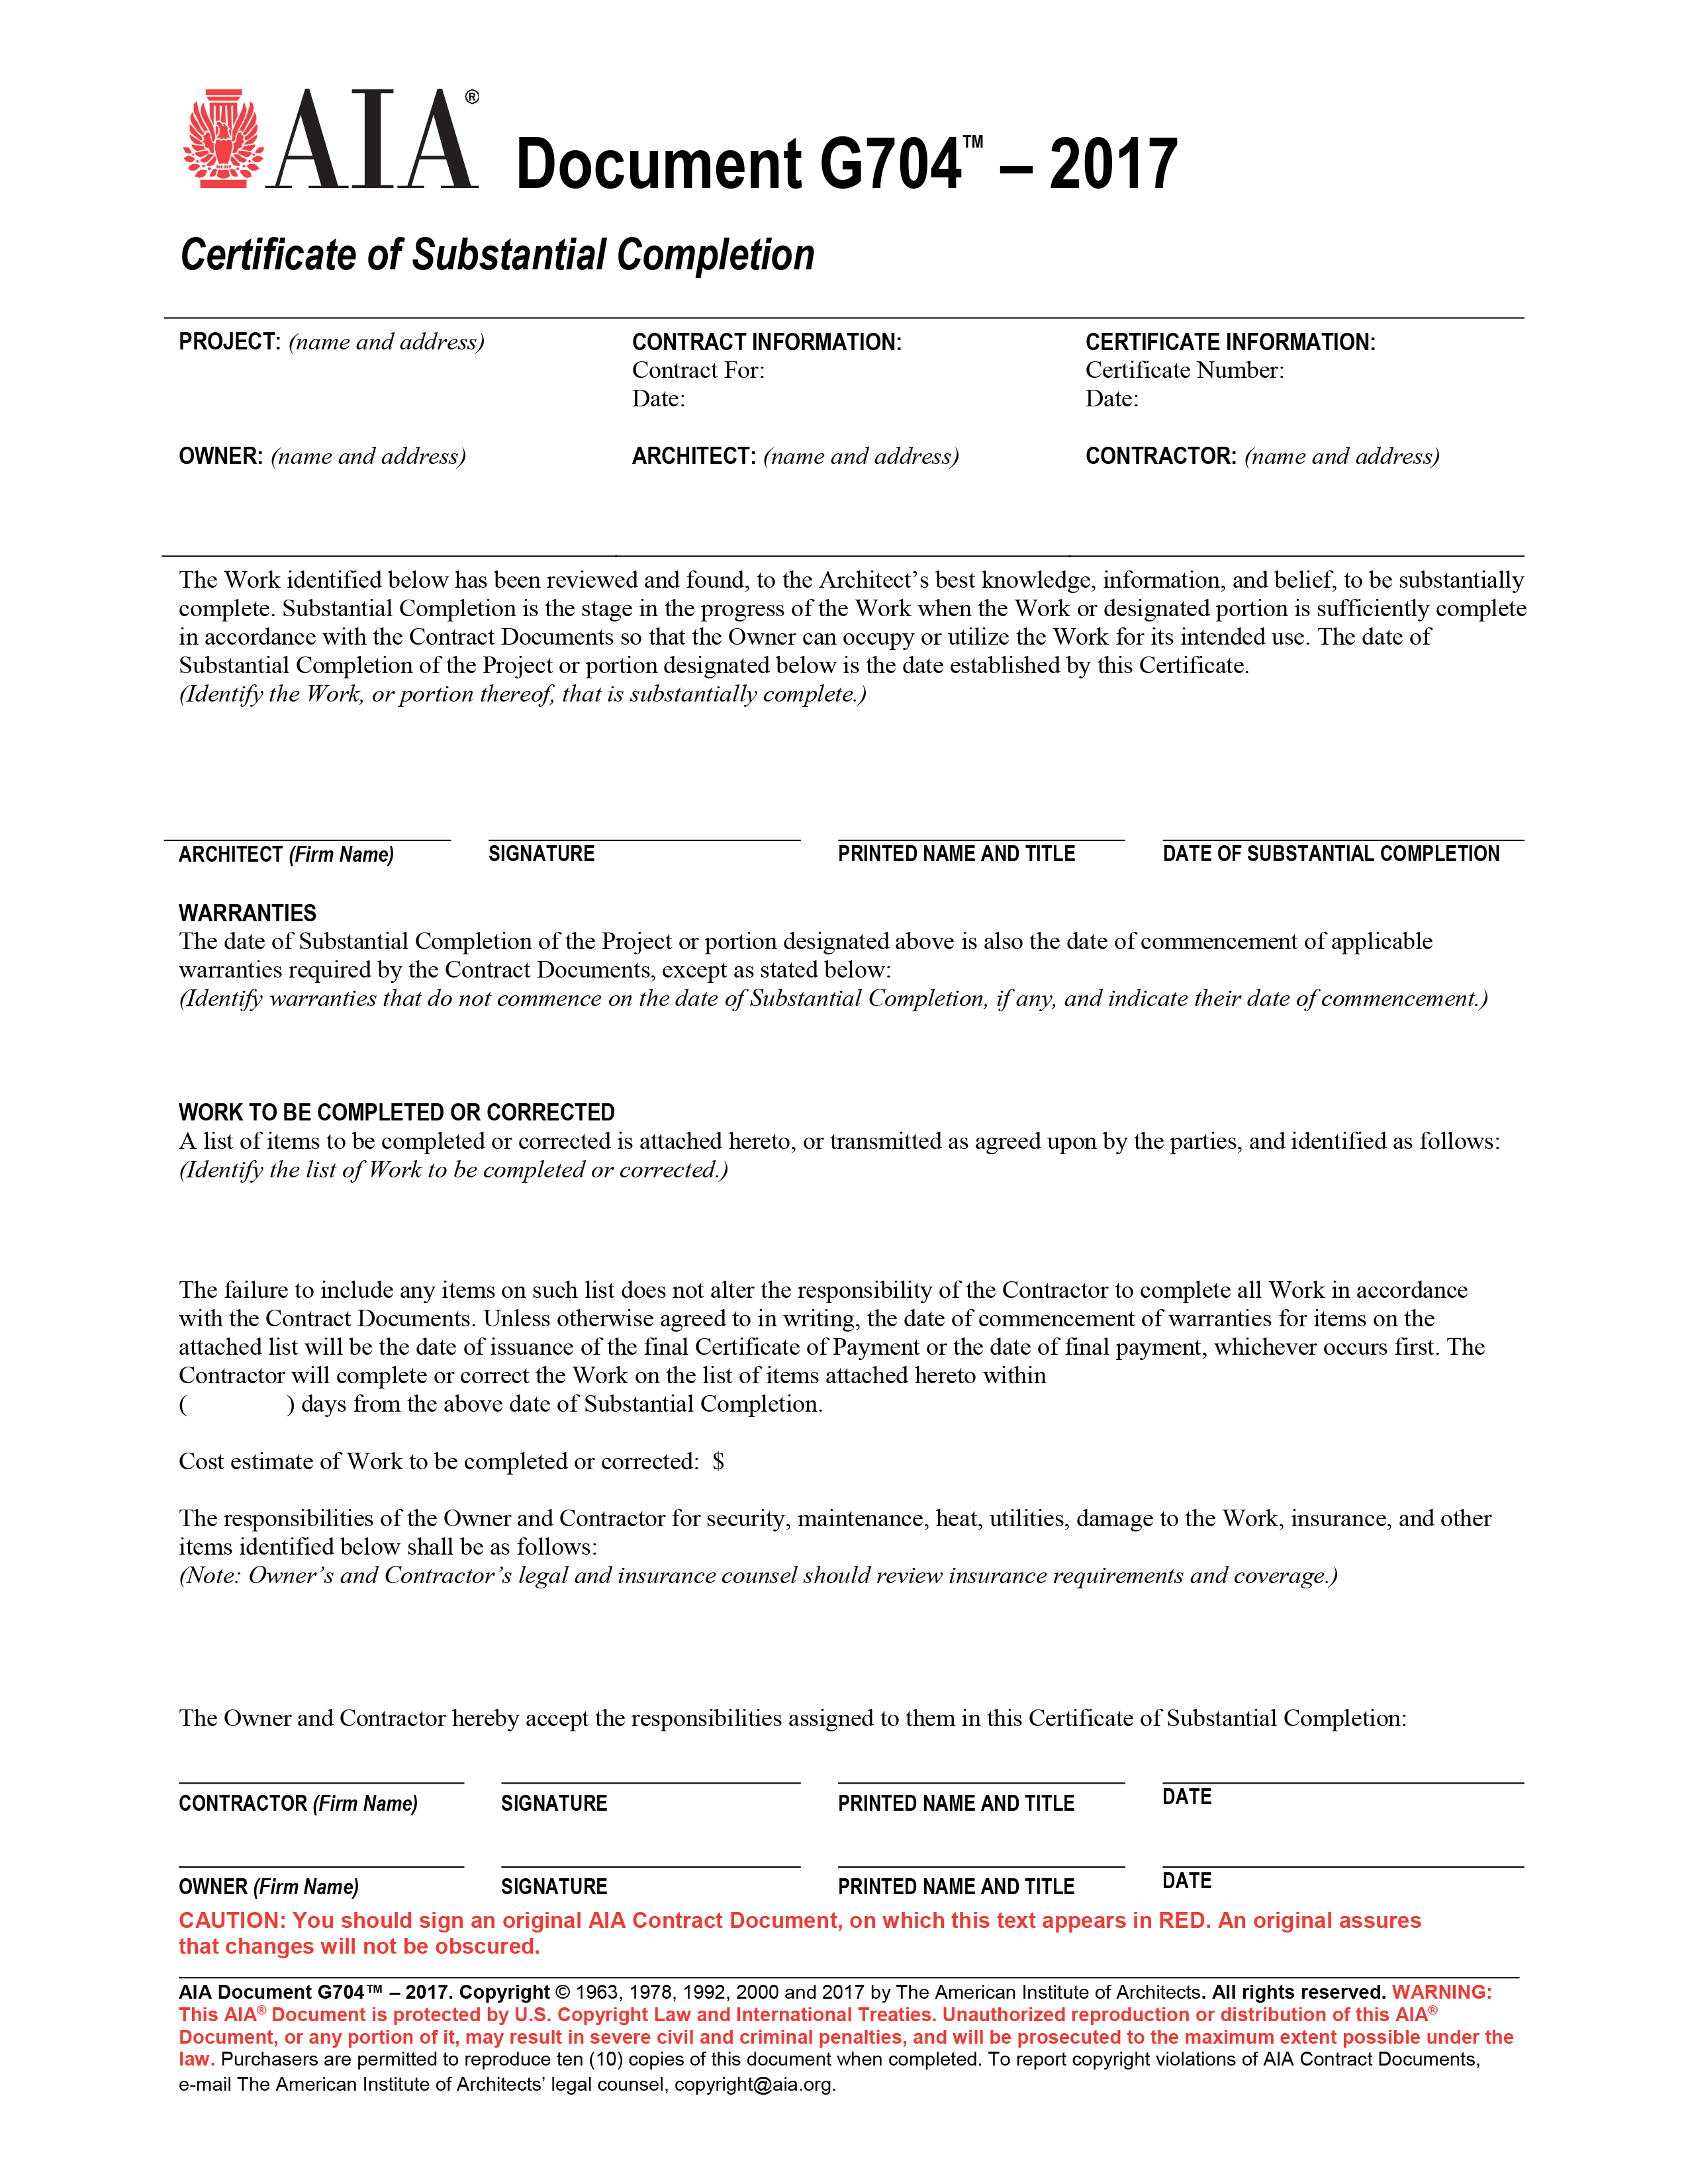 AIA G10 Certificate Of Substantial Completion (10 Pack) With Certificate Of Substantial Completion Template